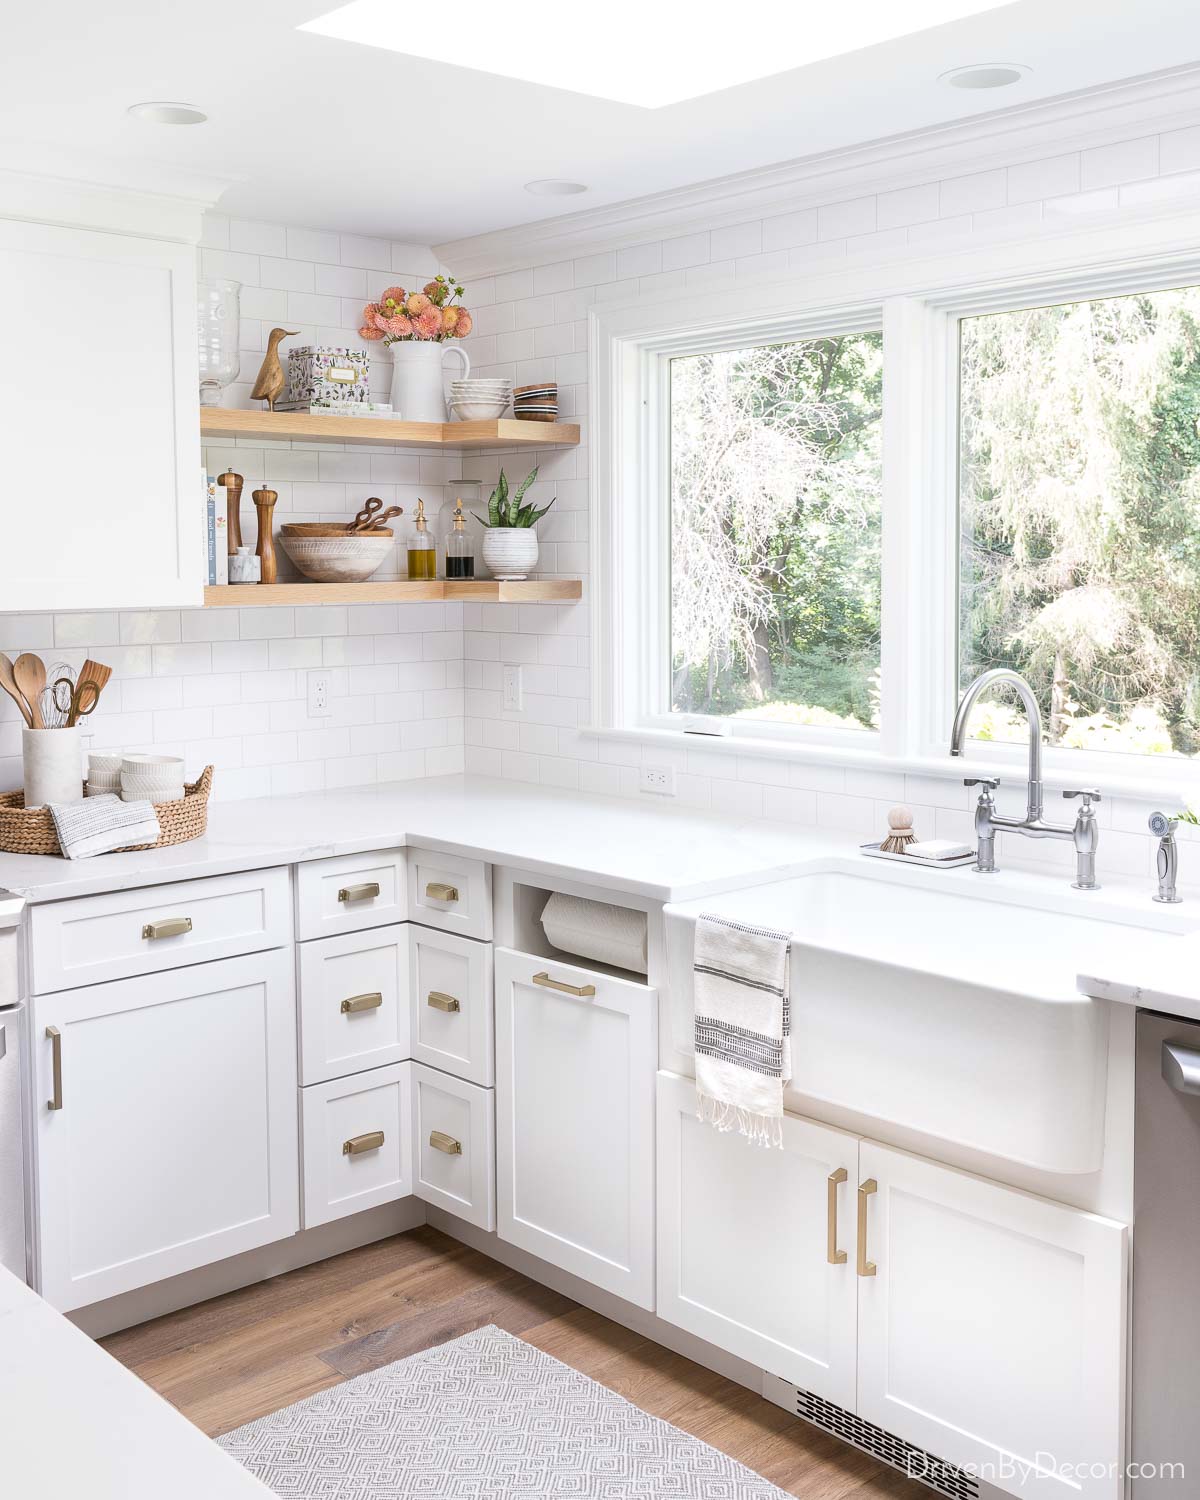 10 Kitchen Remodel Ideas: My Must-Haves! - Driven by Decor